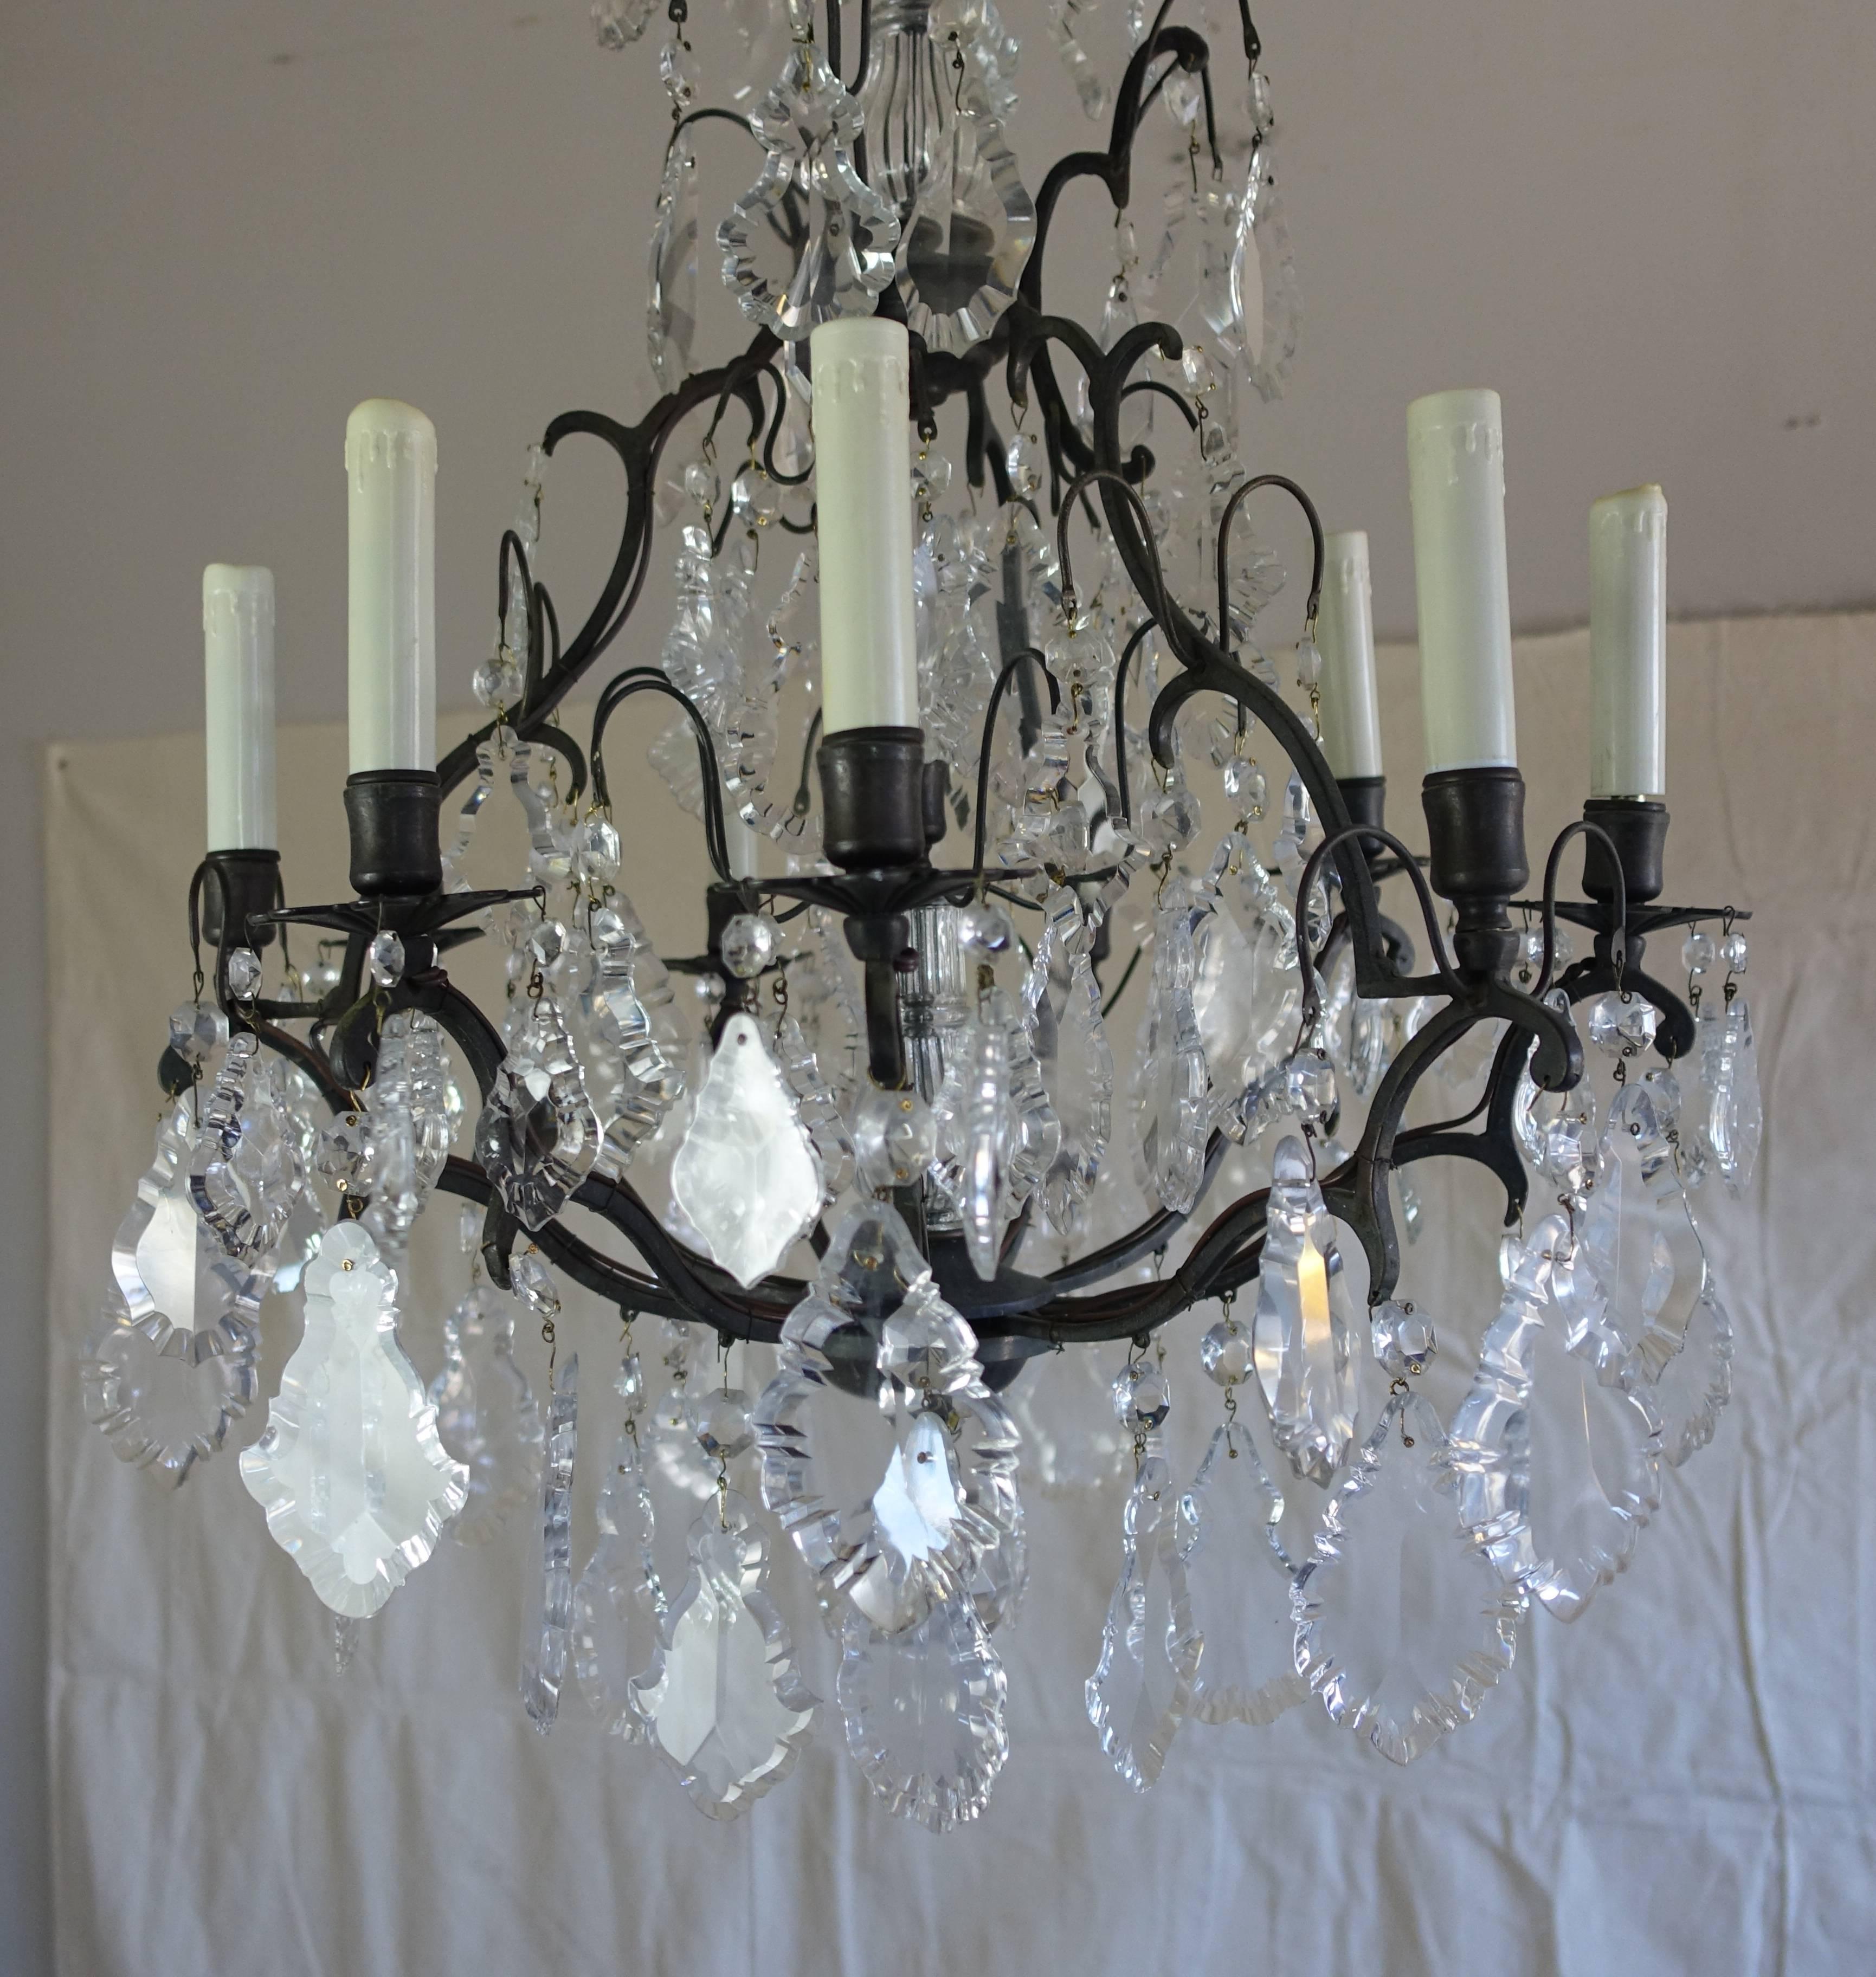 French crystal (nine) light chandelier with an antique finished brass frame adorned with quality pendeloque shaped crystals throughout. Great scale for a bedroom, dining room or entry. The fixture is wired with American sockets and is ready to